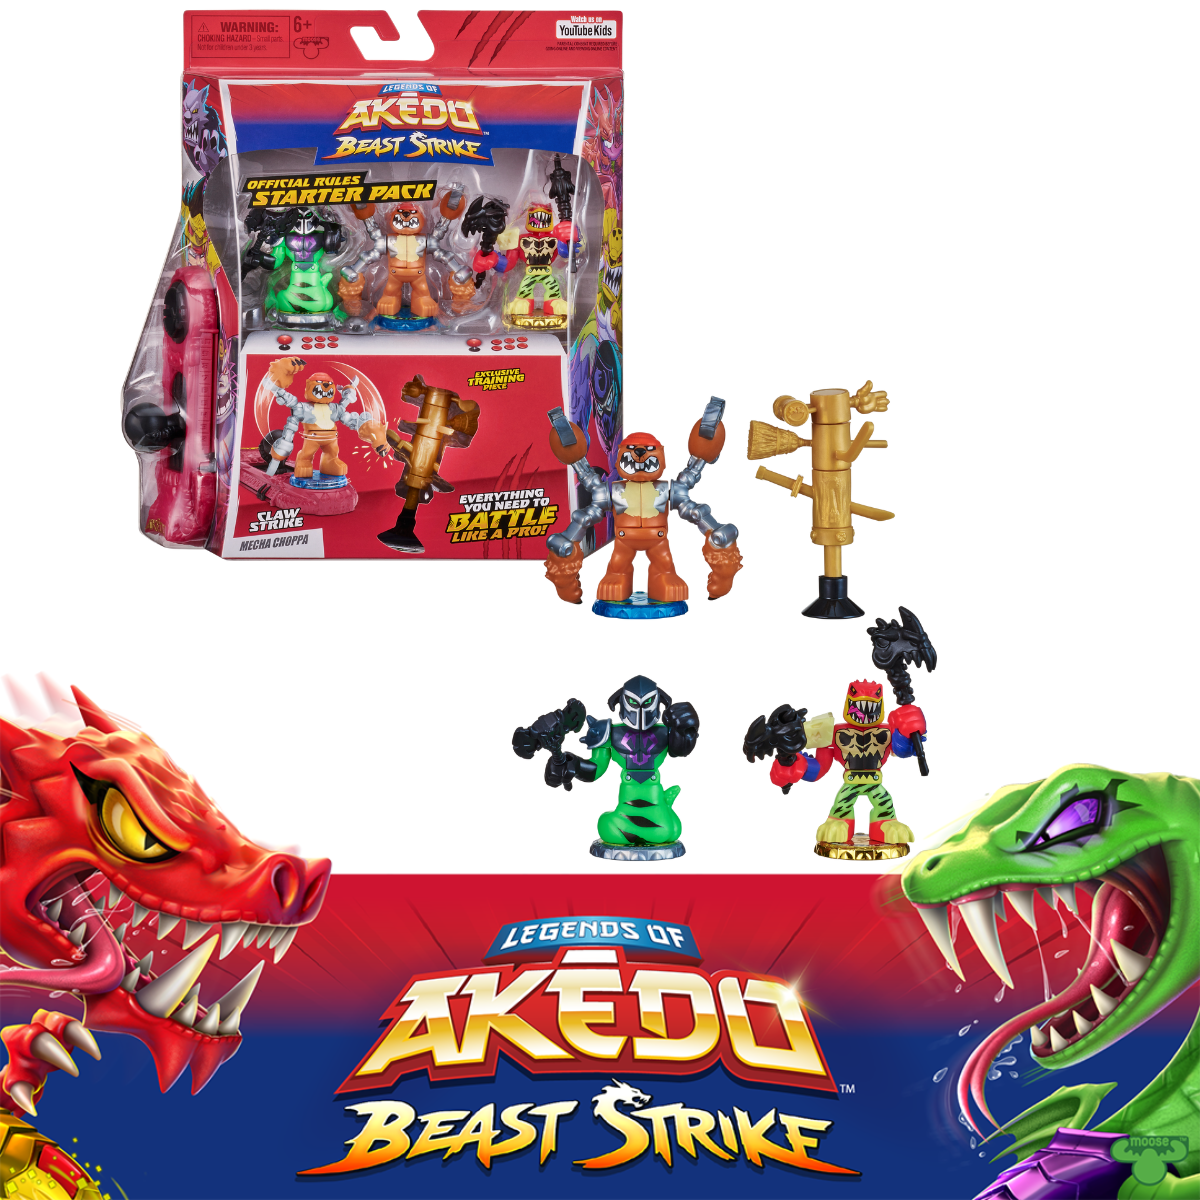 Akedo Beast Claw Strike Starter Pack 3 Mini Battling Warriors with  Exclusive Controller, Ages 6+